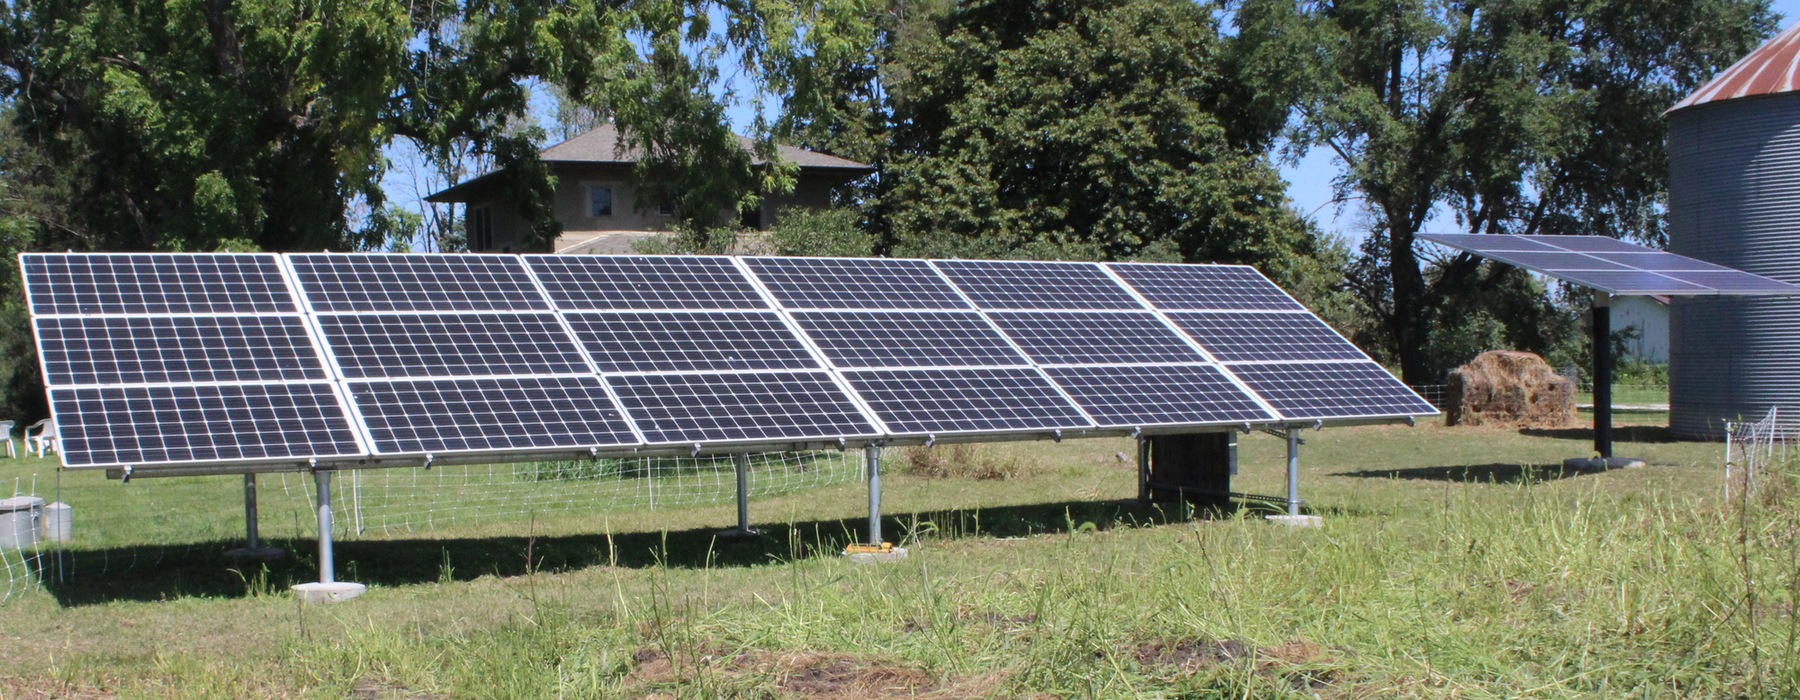 Solar panels sit on a farm with a grain bin and trees in the surround.